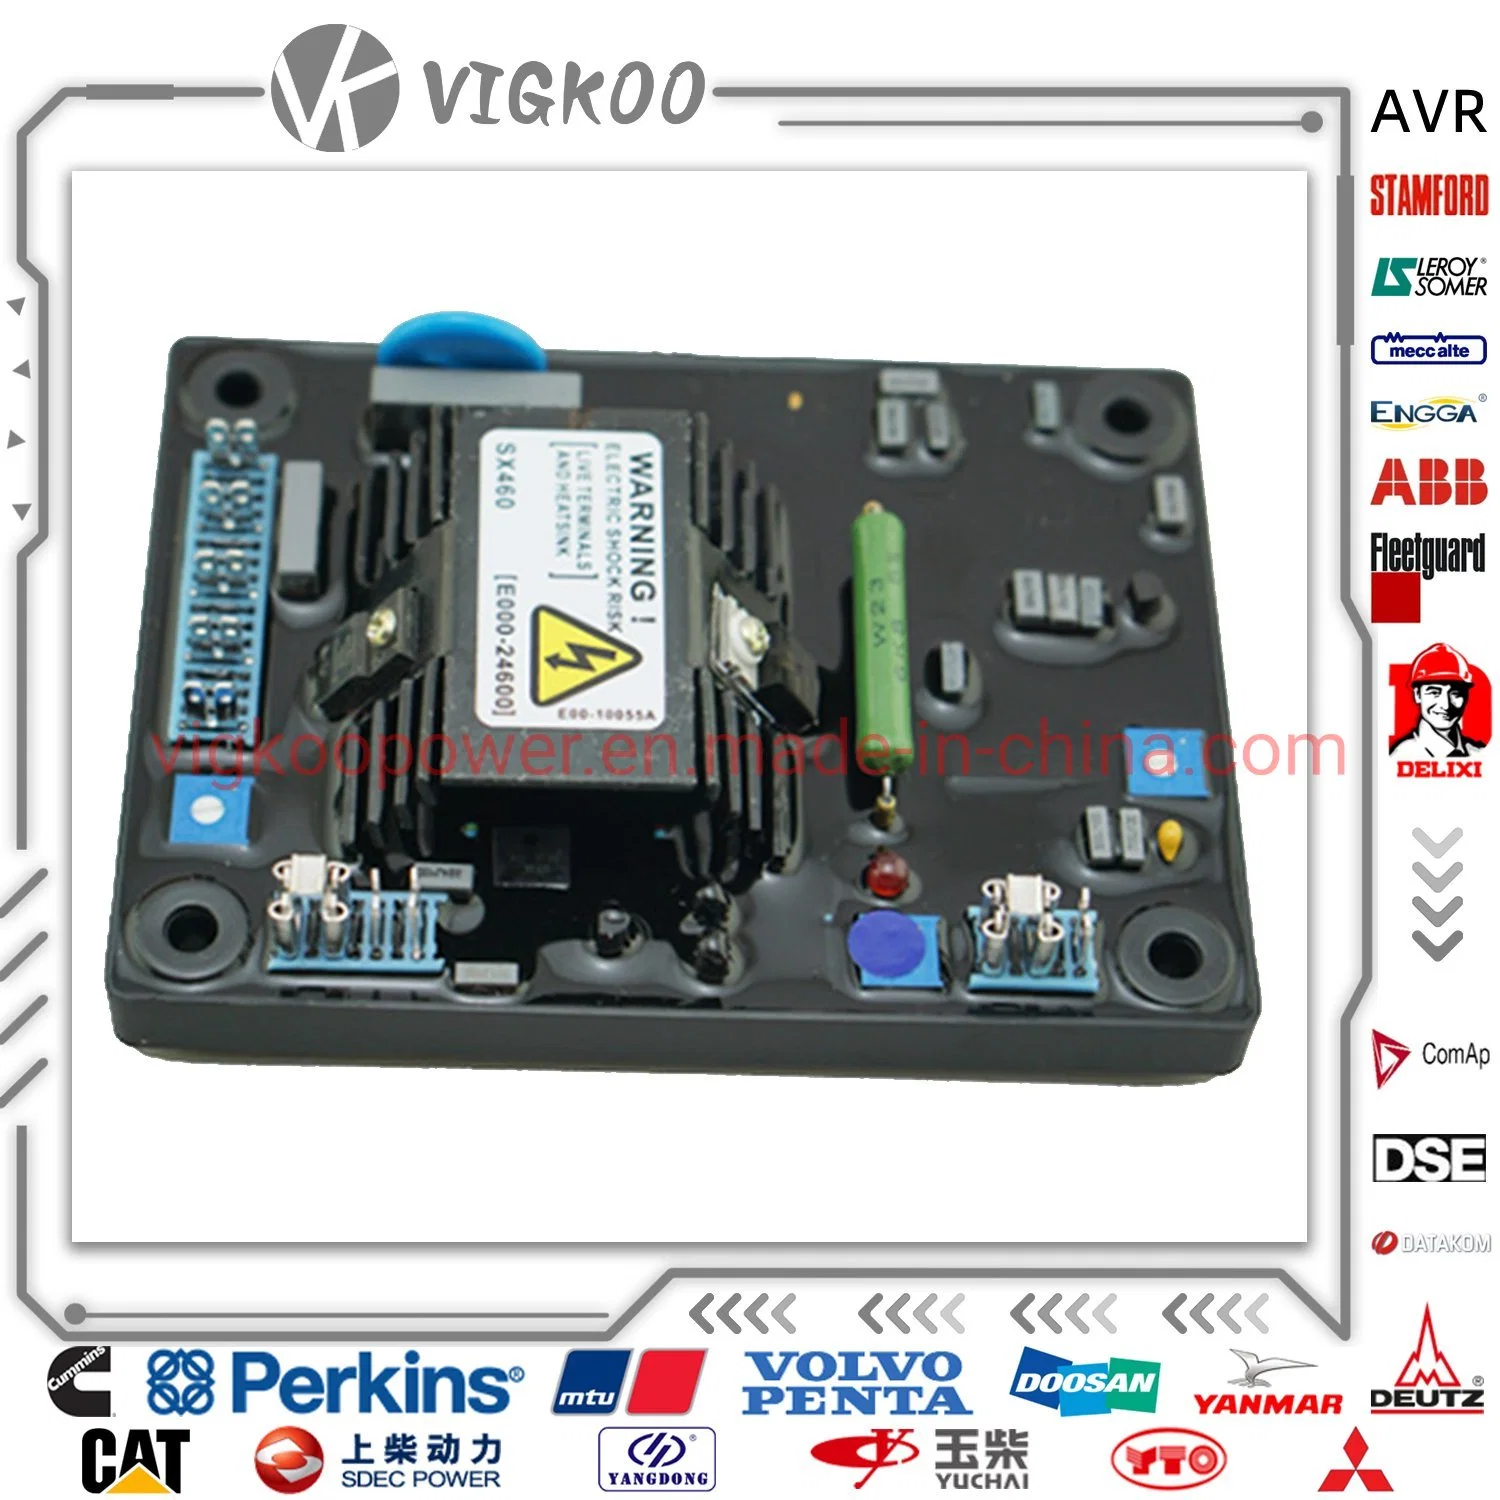 AVR Sx460 Automatic Voltage Volt Regulator Replacement for Stamford Generatorpart